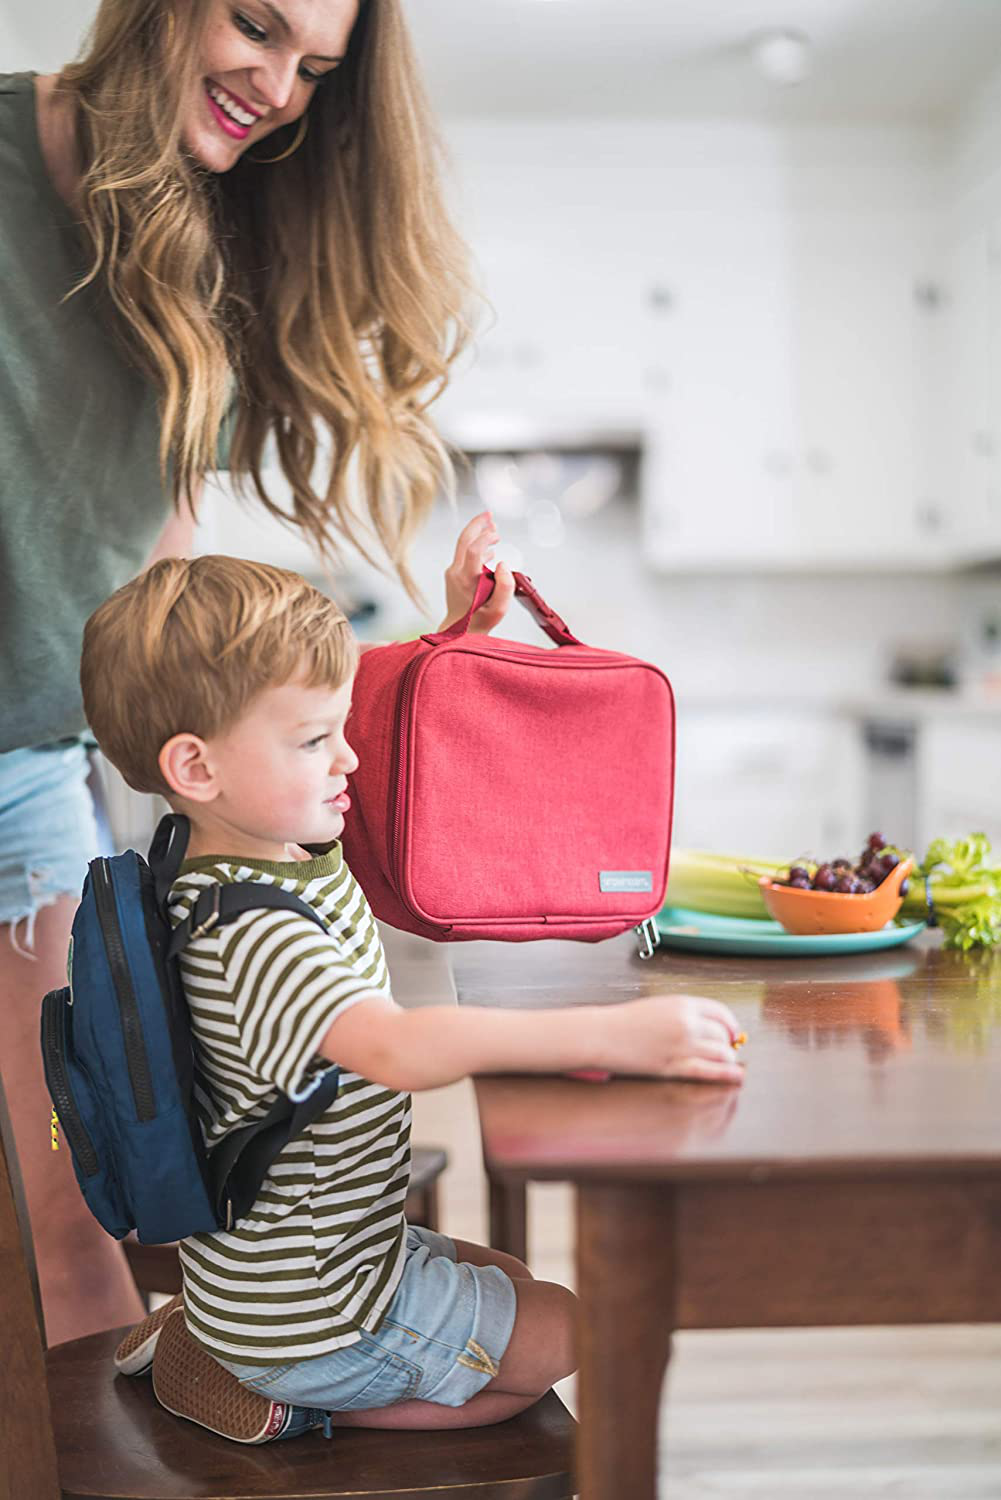 Simple Modern 8L Myriad Lunch Bag for Women & Men - Red Insulated Kids Lunch Box -Cherry